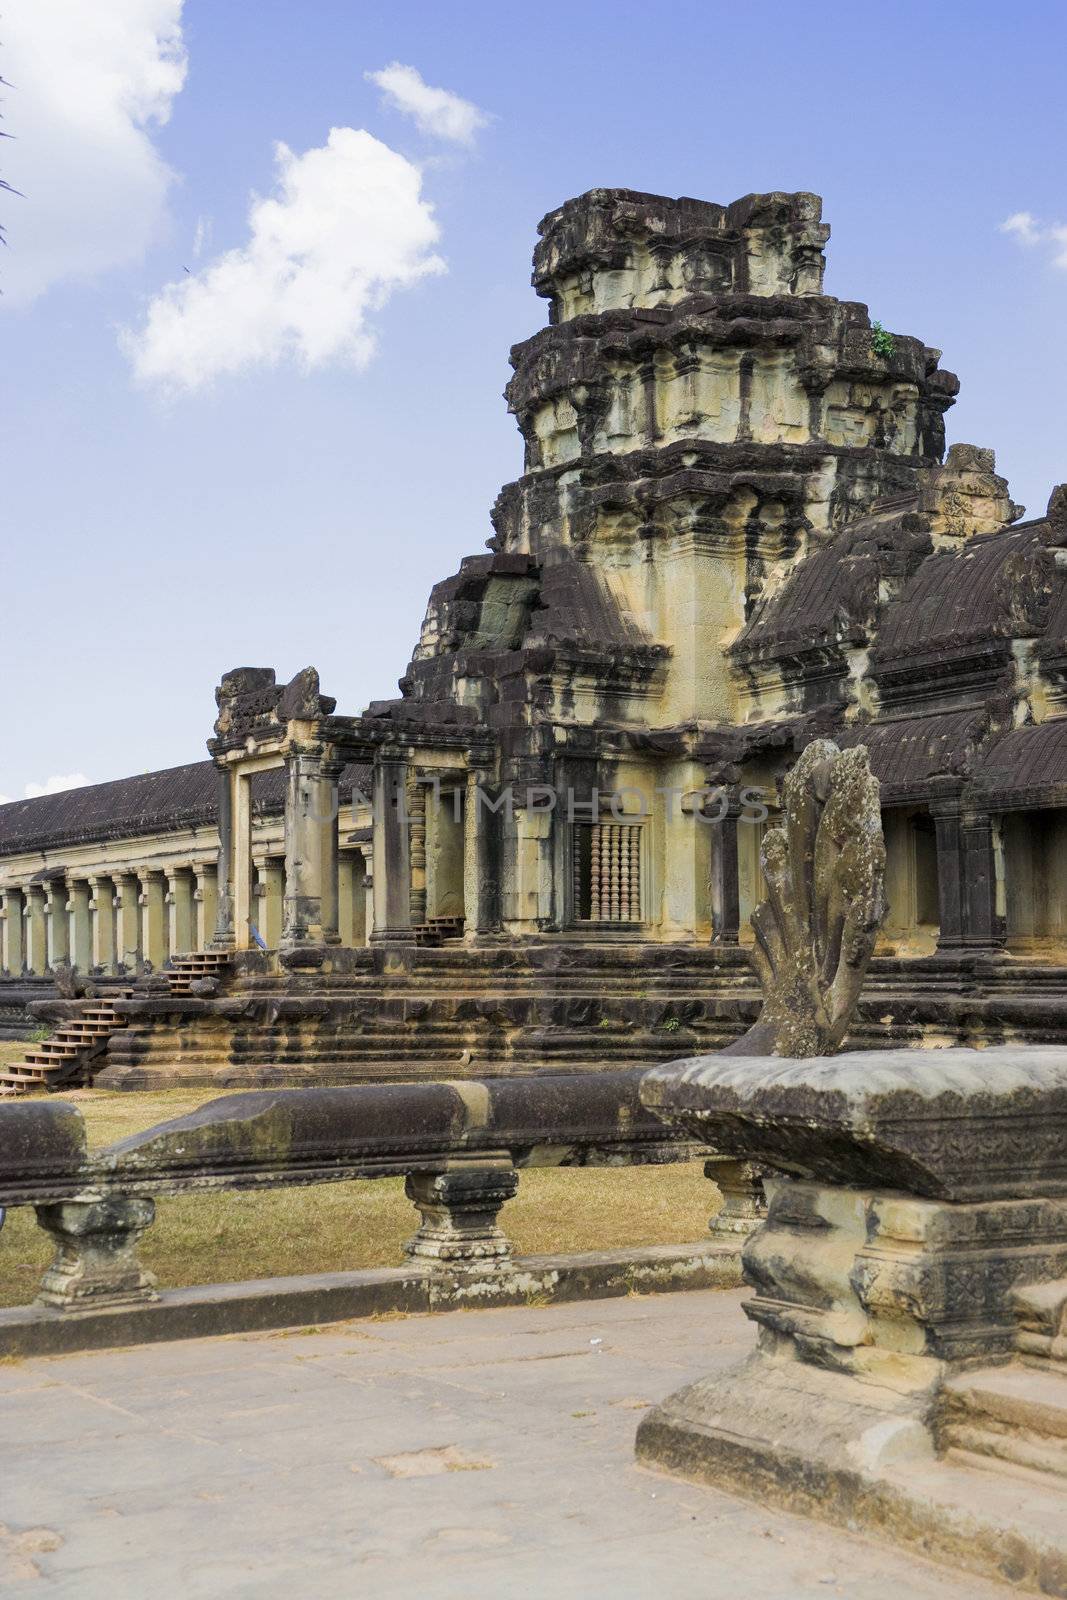 Image of UNESCO's World Heritage Site of Angkor Wat, located at Siem Reap, Cambodia.